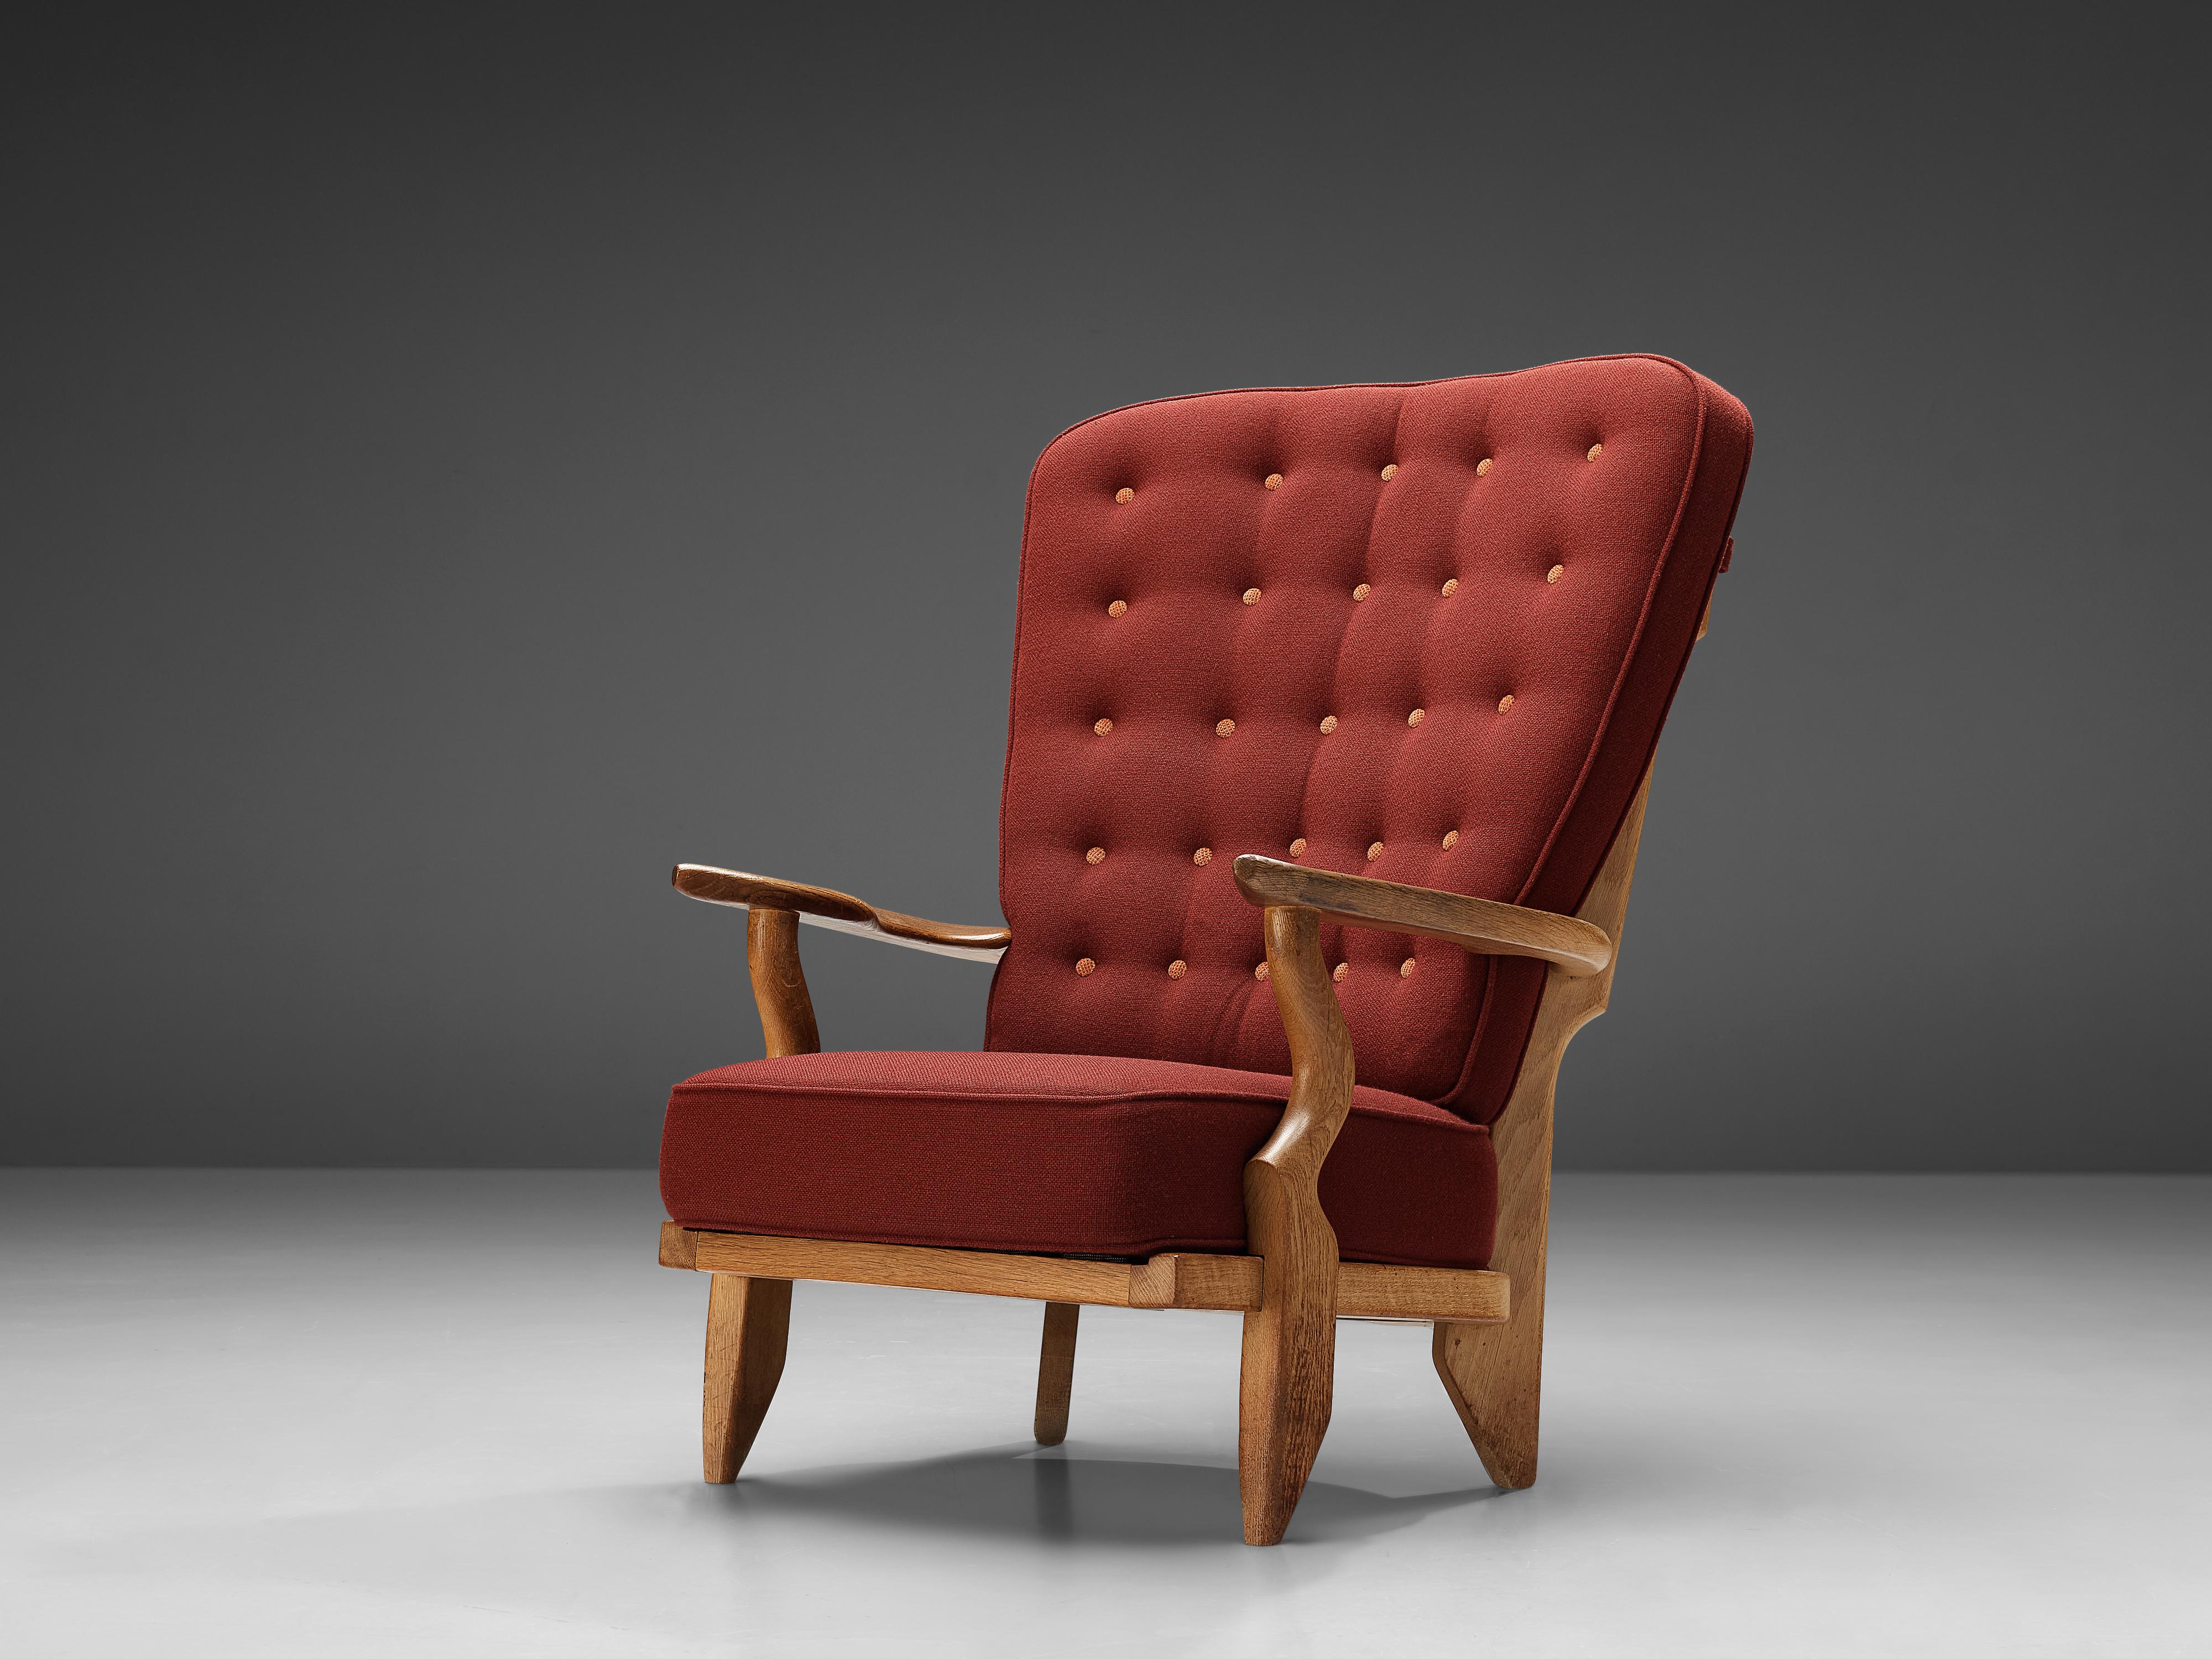 Guillerme et Chambron for Votre Maison, 'Grand Repos' lounge chair, oak, burgundy red upholstery, France, 1960s

Guillerme and Chambron are known for their high quality solid oak furniture, from which this is another great example. The chair has an